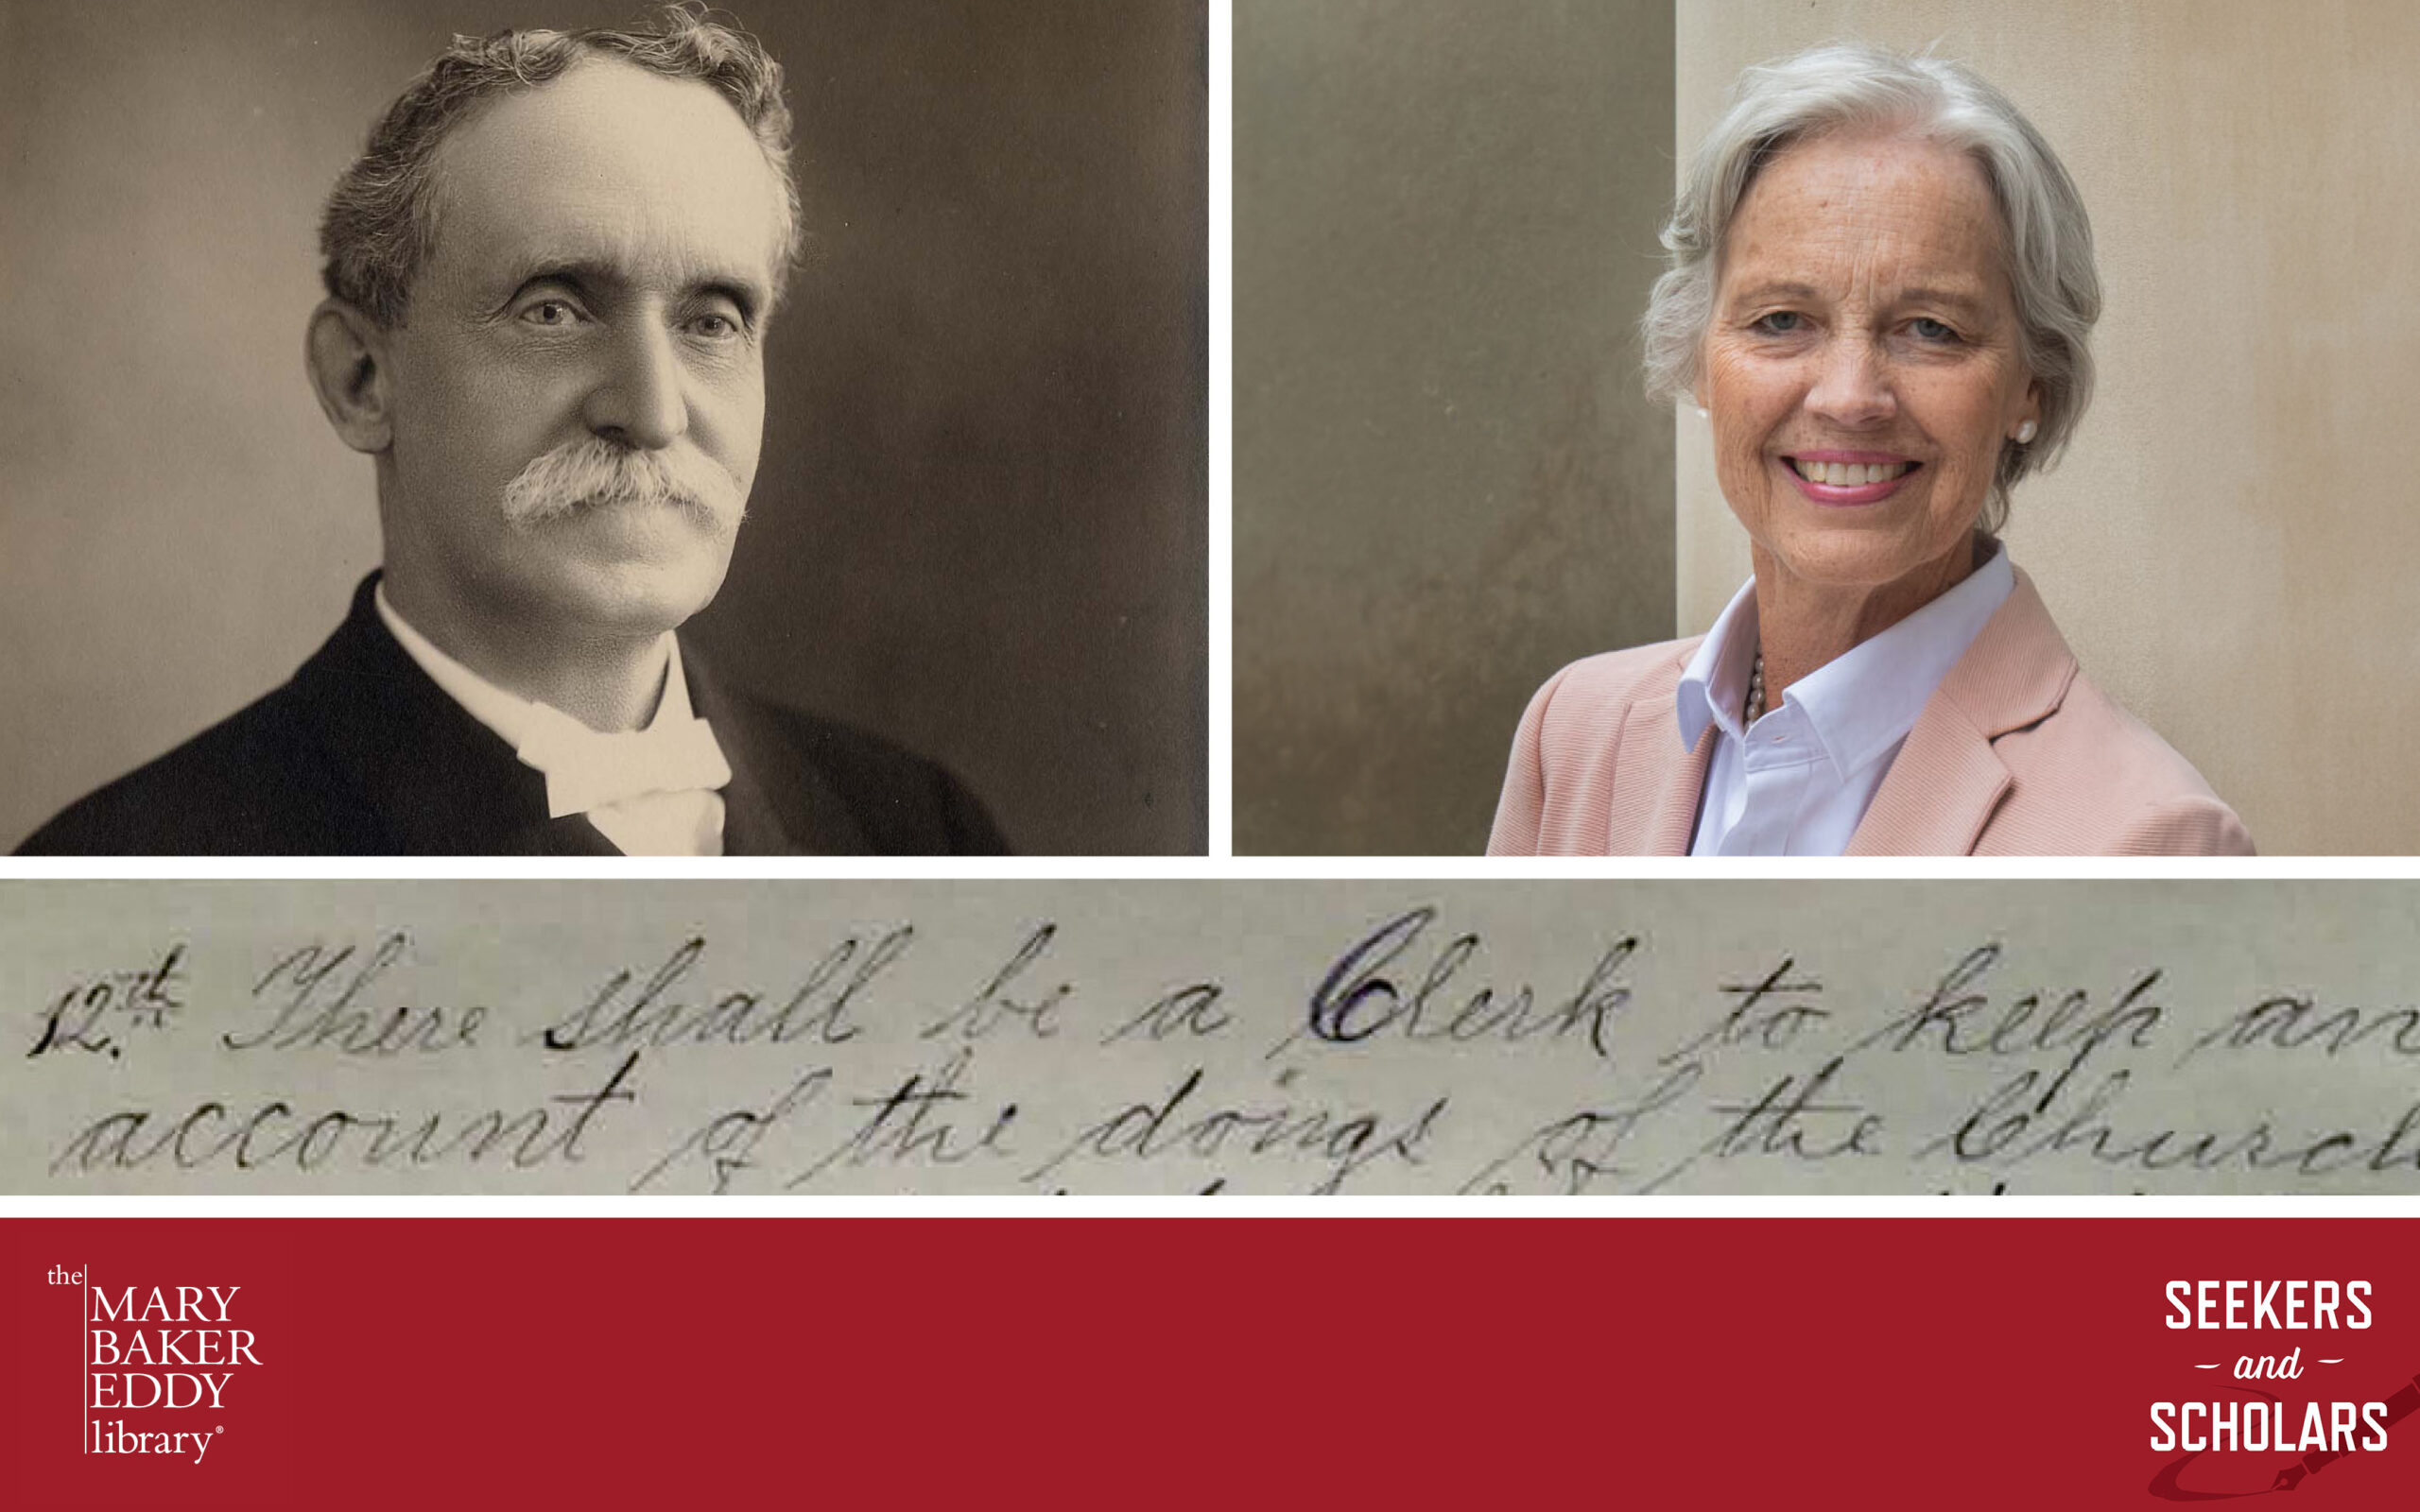 Episode artwork: Collage with black-and-white photo of William B. Johnson, color photo of Martha Moffett, and handwritten manuscript text that reads, "12th. There shall be a Clerk to keep an account of the doings of the Church."